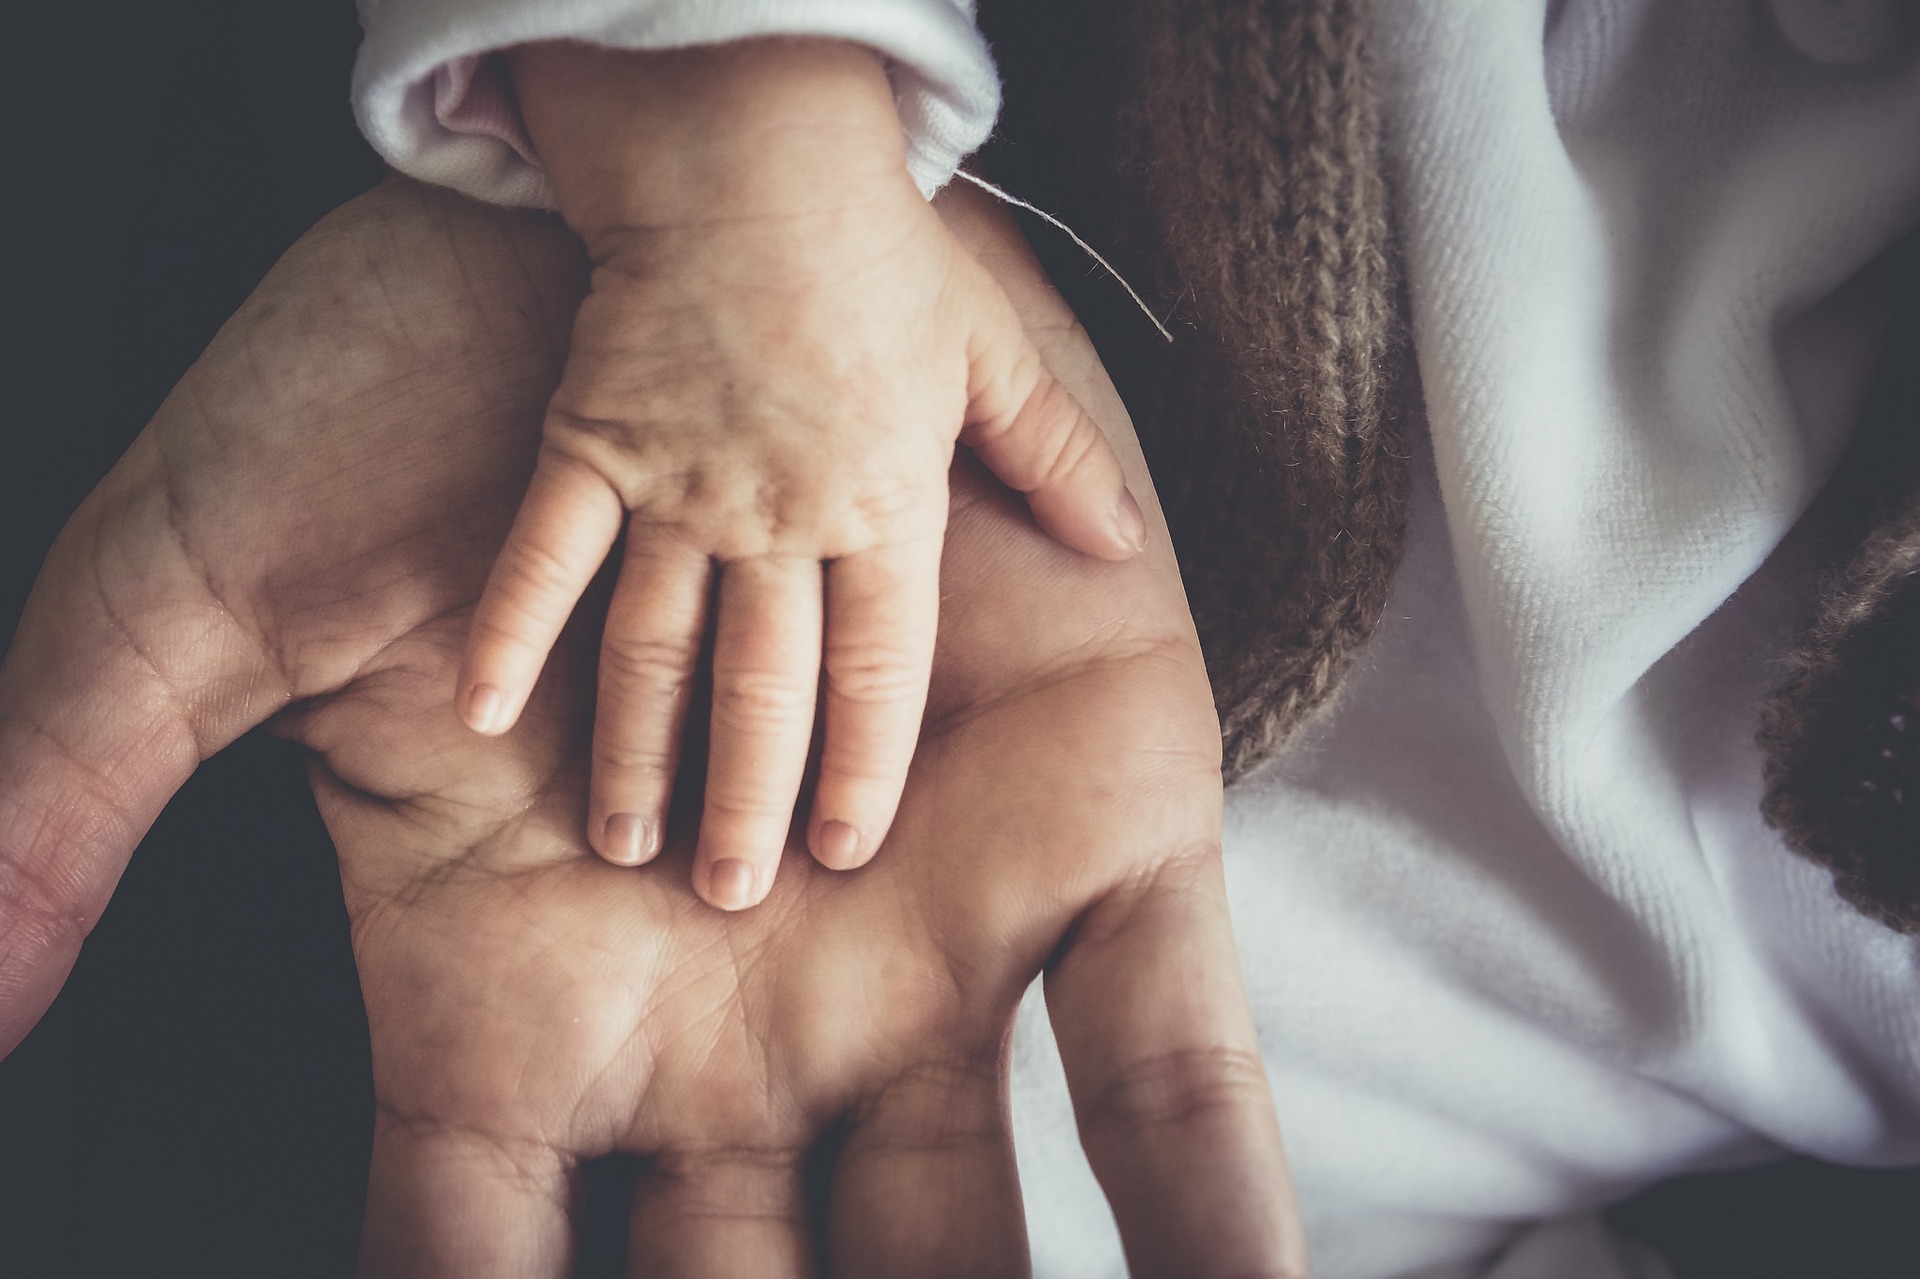 adult and infant hands